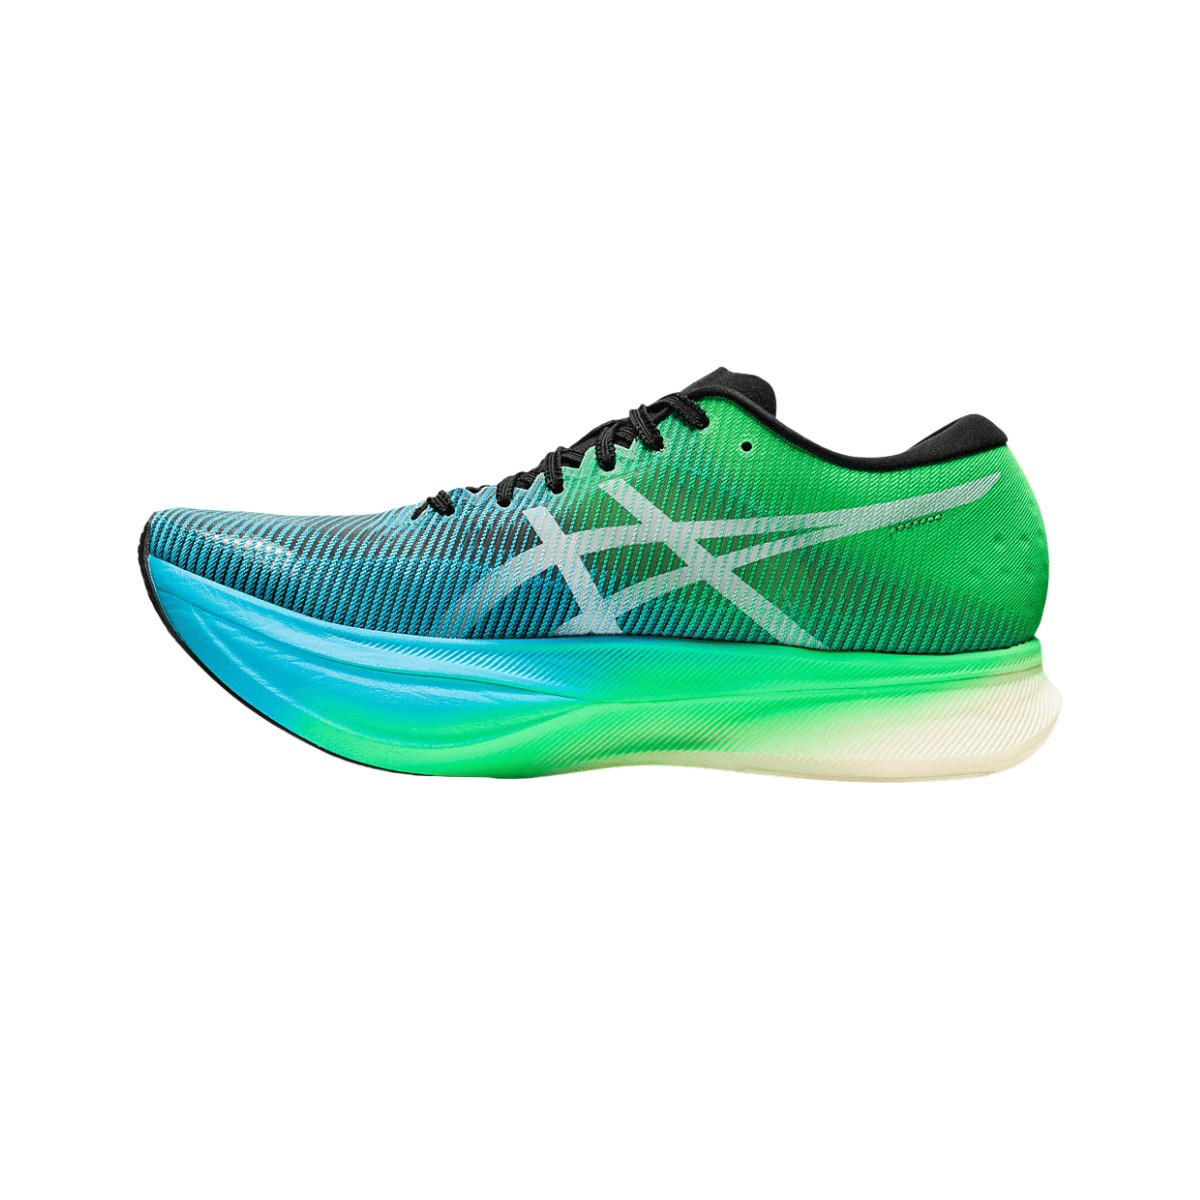 Asics Metaspeed Sky+ Green Blue AW22 Shoes